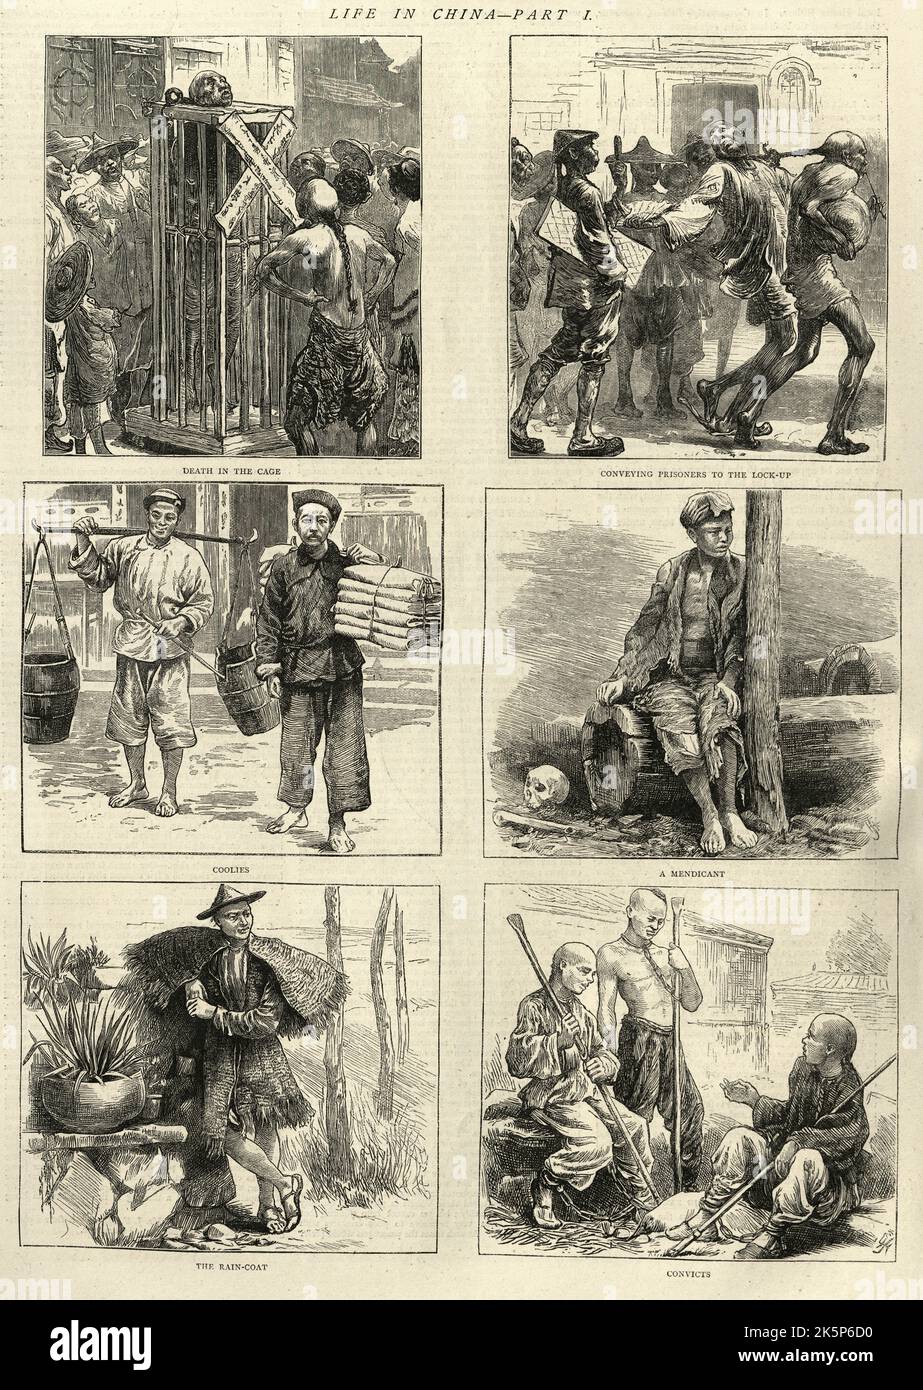 Life in China in the 19th Century, Execution, Prisoners, Coolies, Mendicant, Convicts, 19th Century Stock Photo